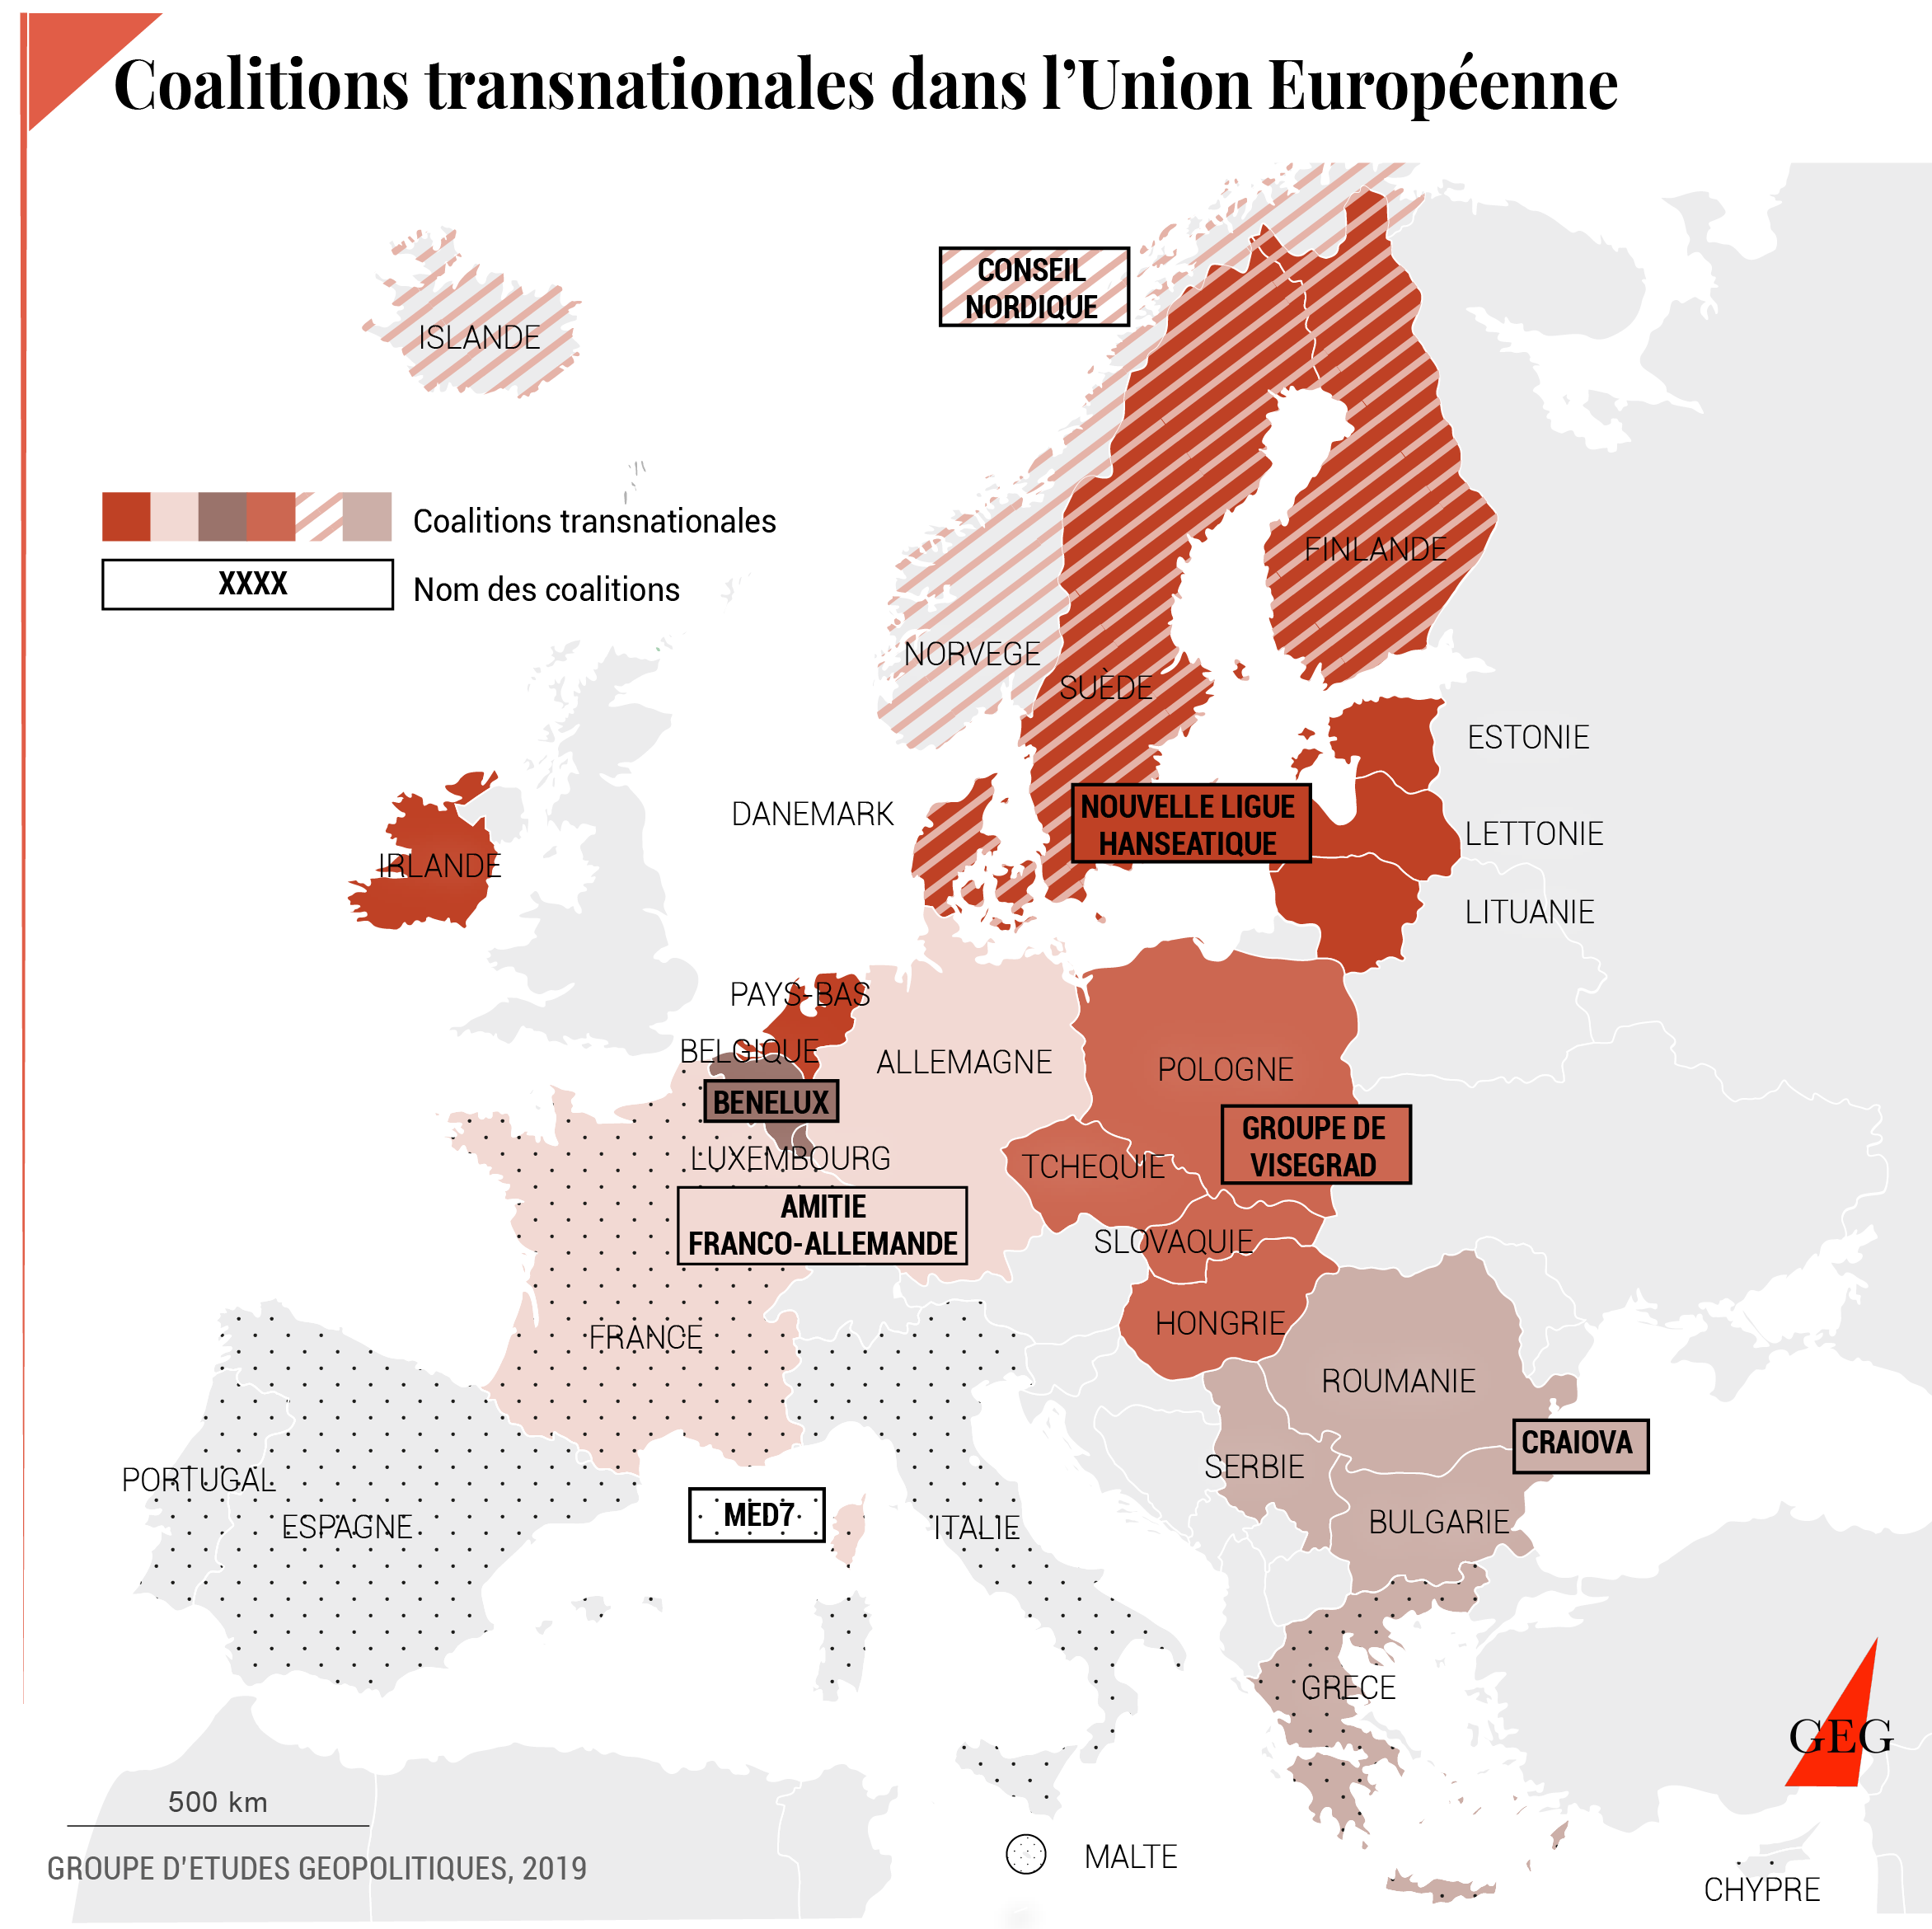 Map of transnational coalitions in the EU